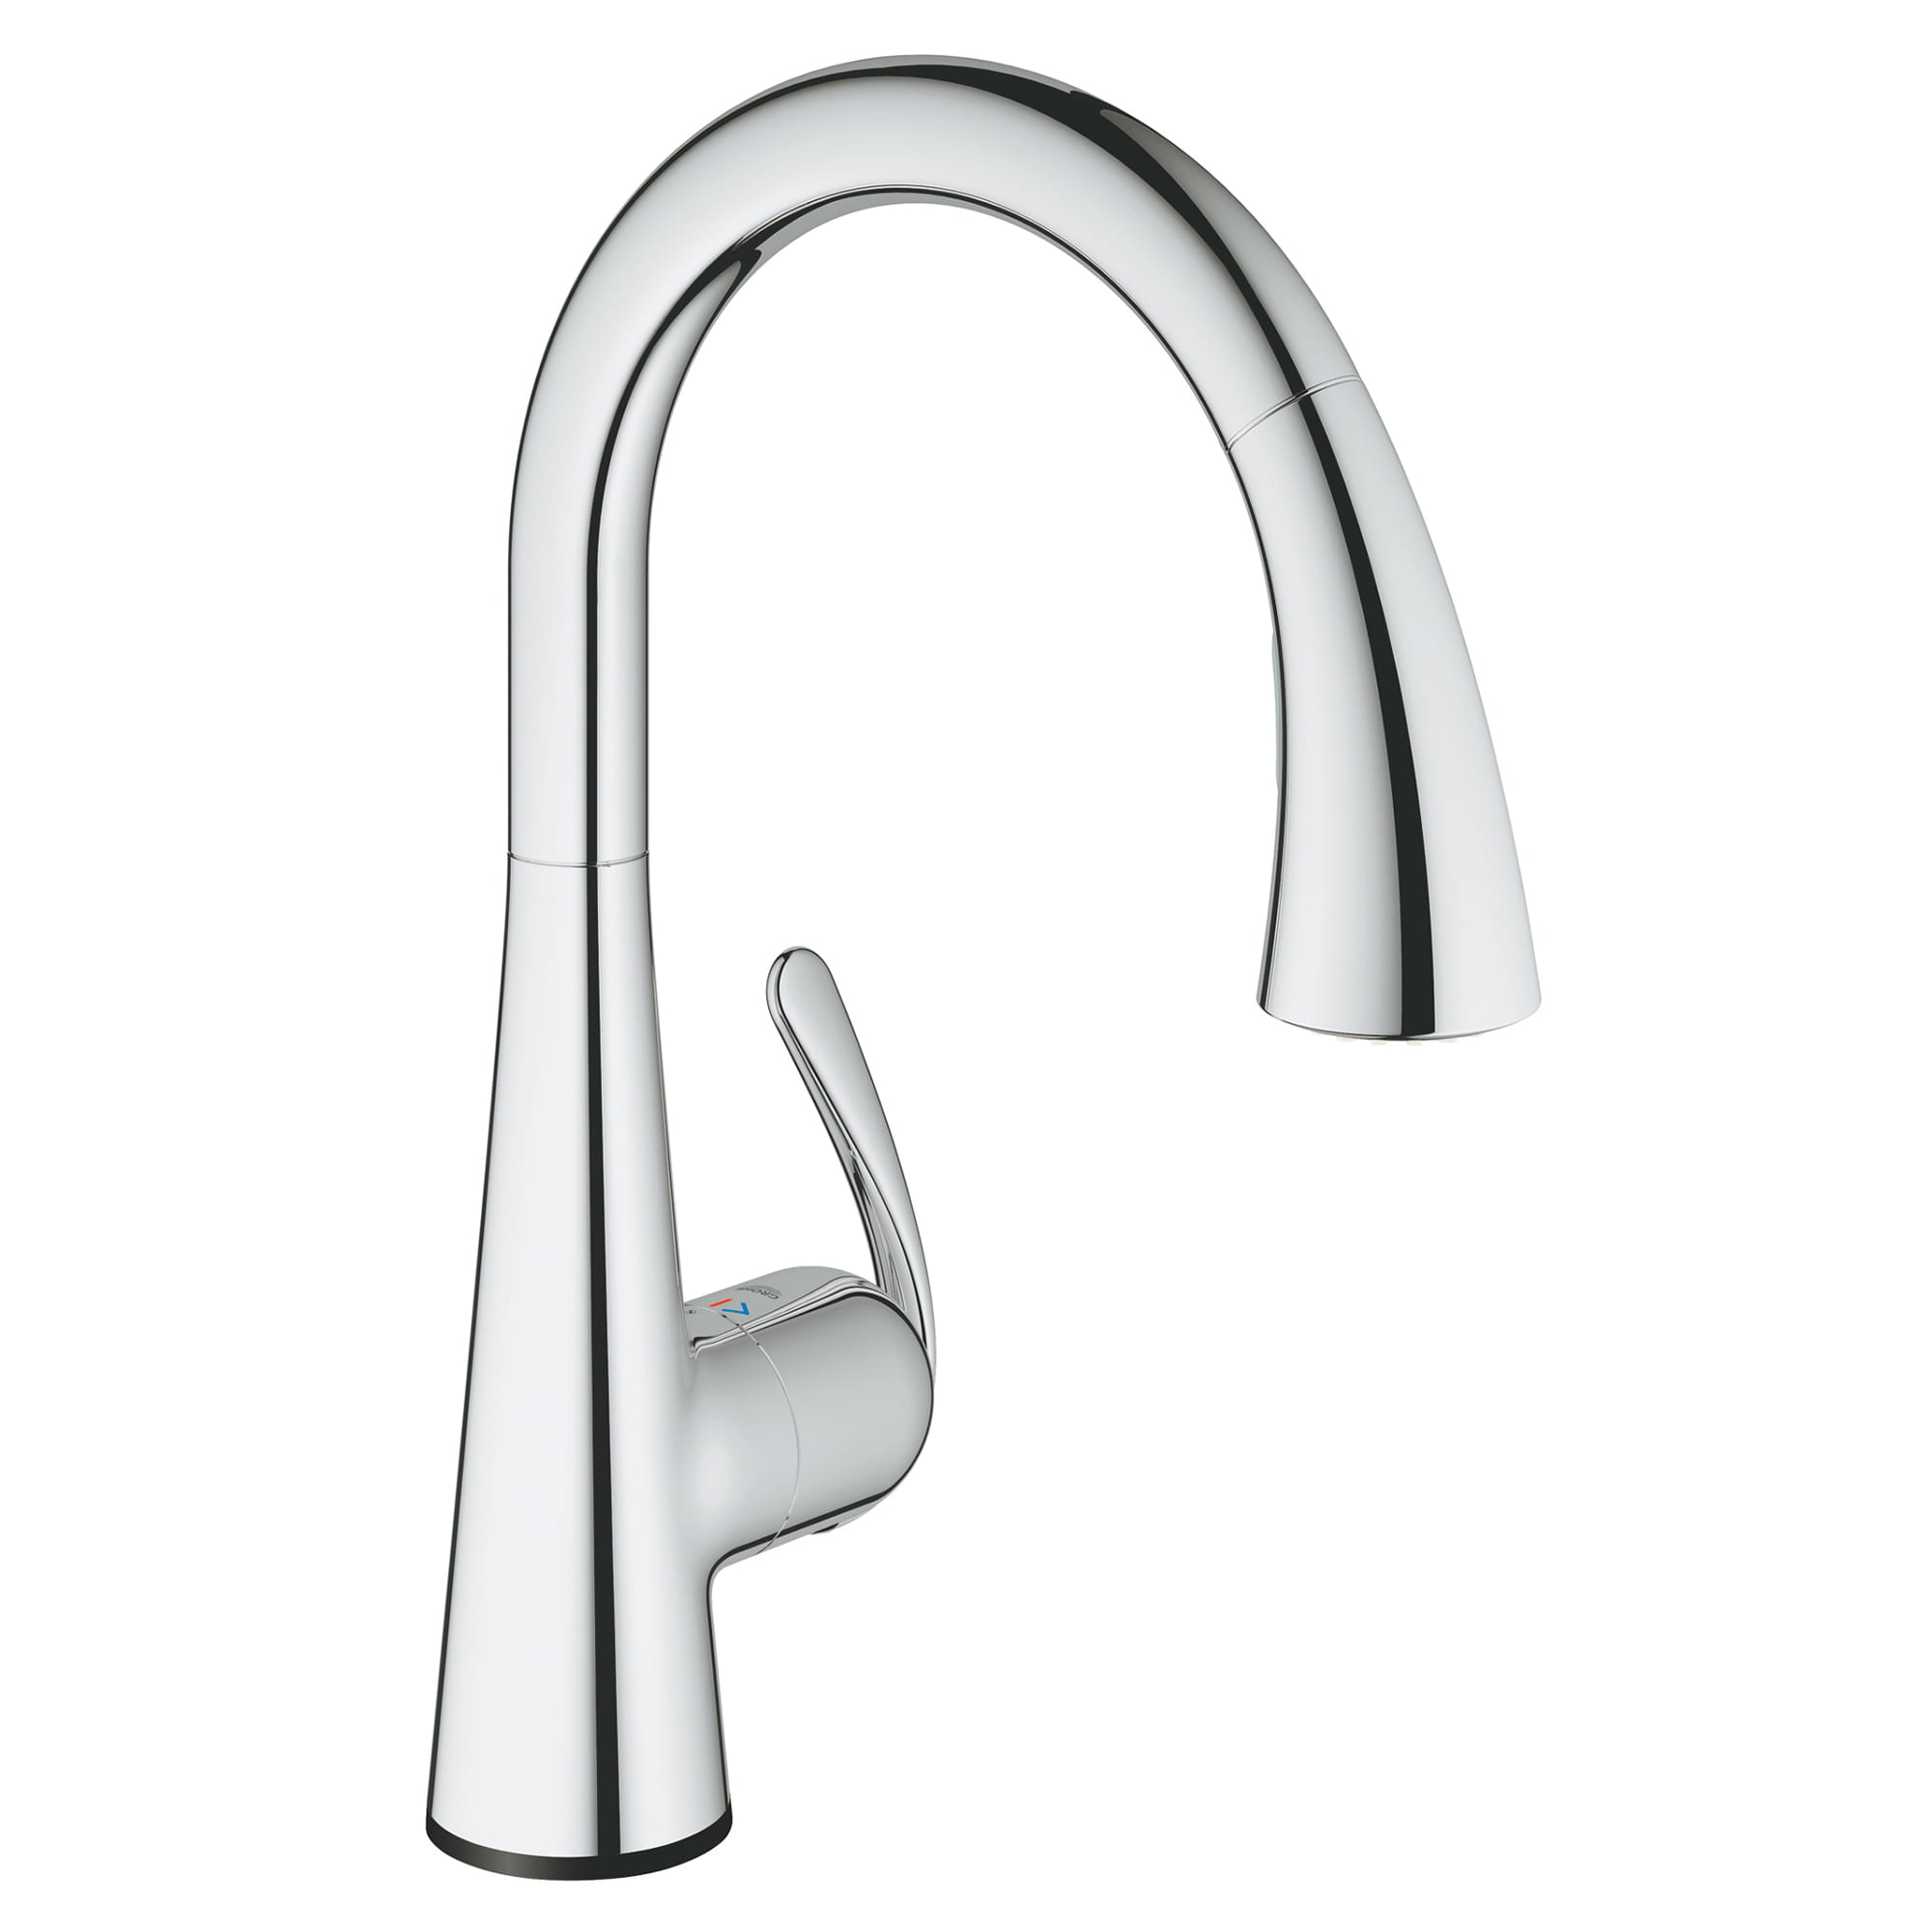 SINGLE-HANDLE PULL DOWN KITCHEN FAUCET DUAL SPRAY 1.75 GPM WITH TOUCH TECHNOLOGY Model: 30205001-related